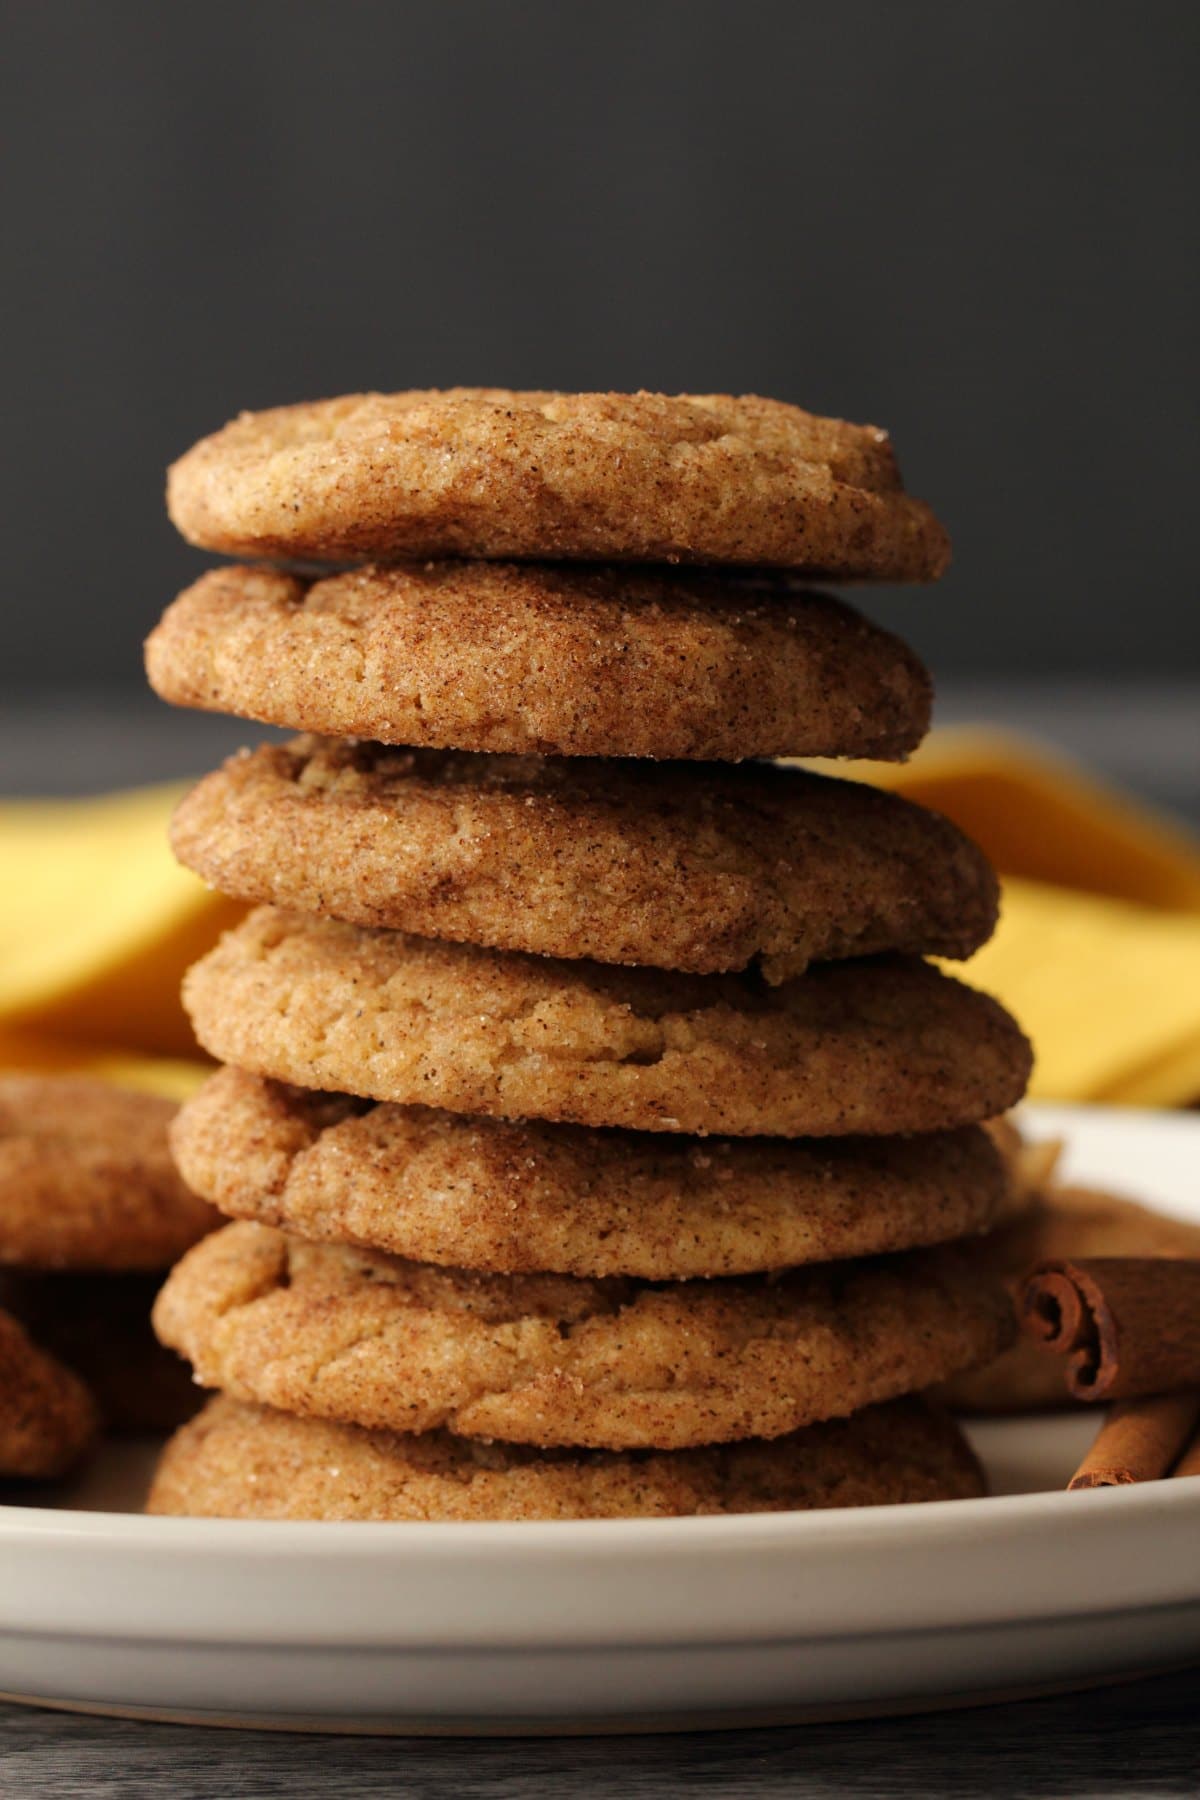 Vegan Snickerdoodles – Soft And Puffy!